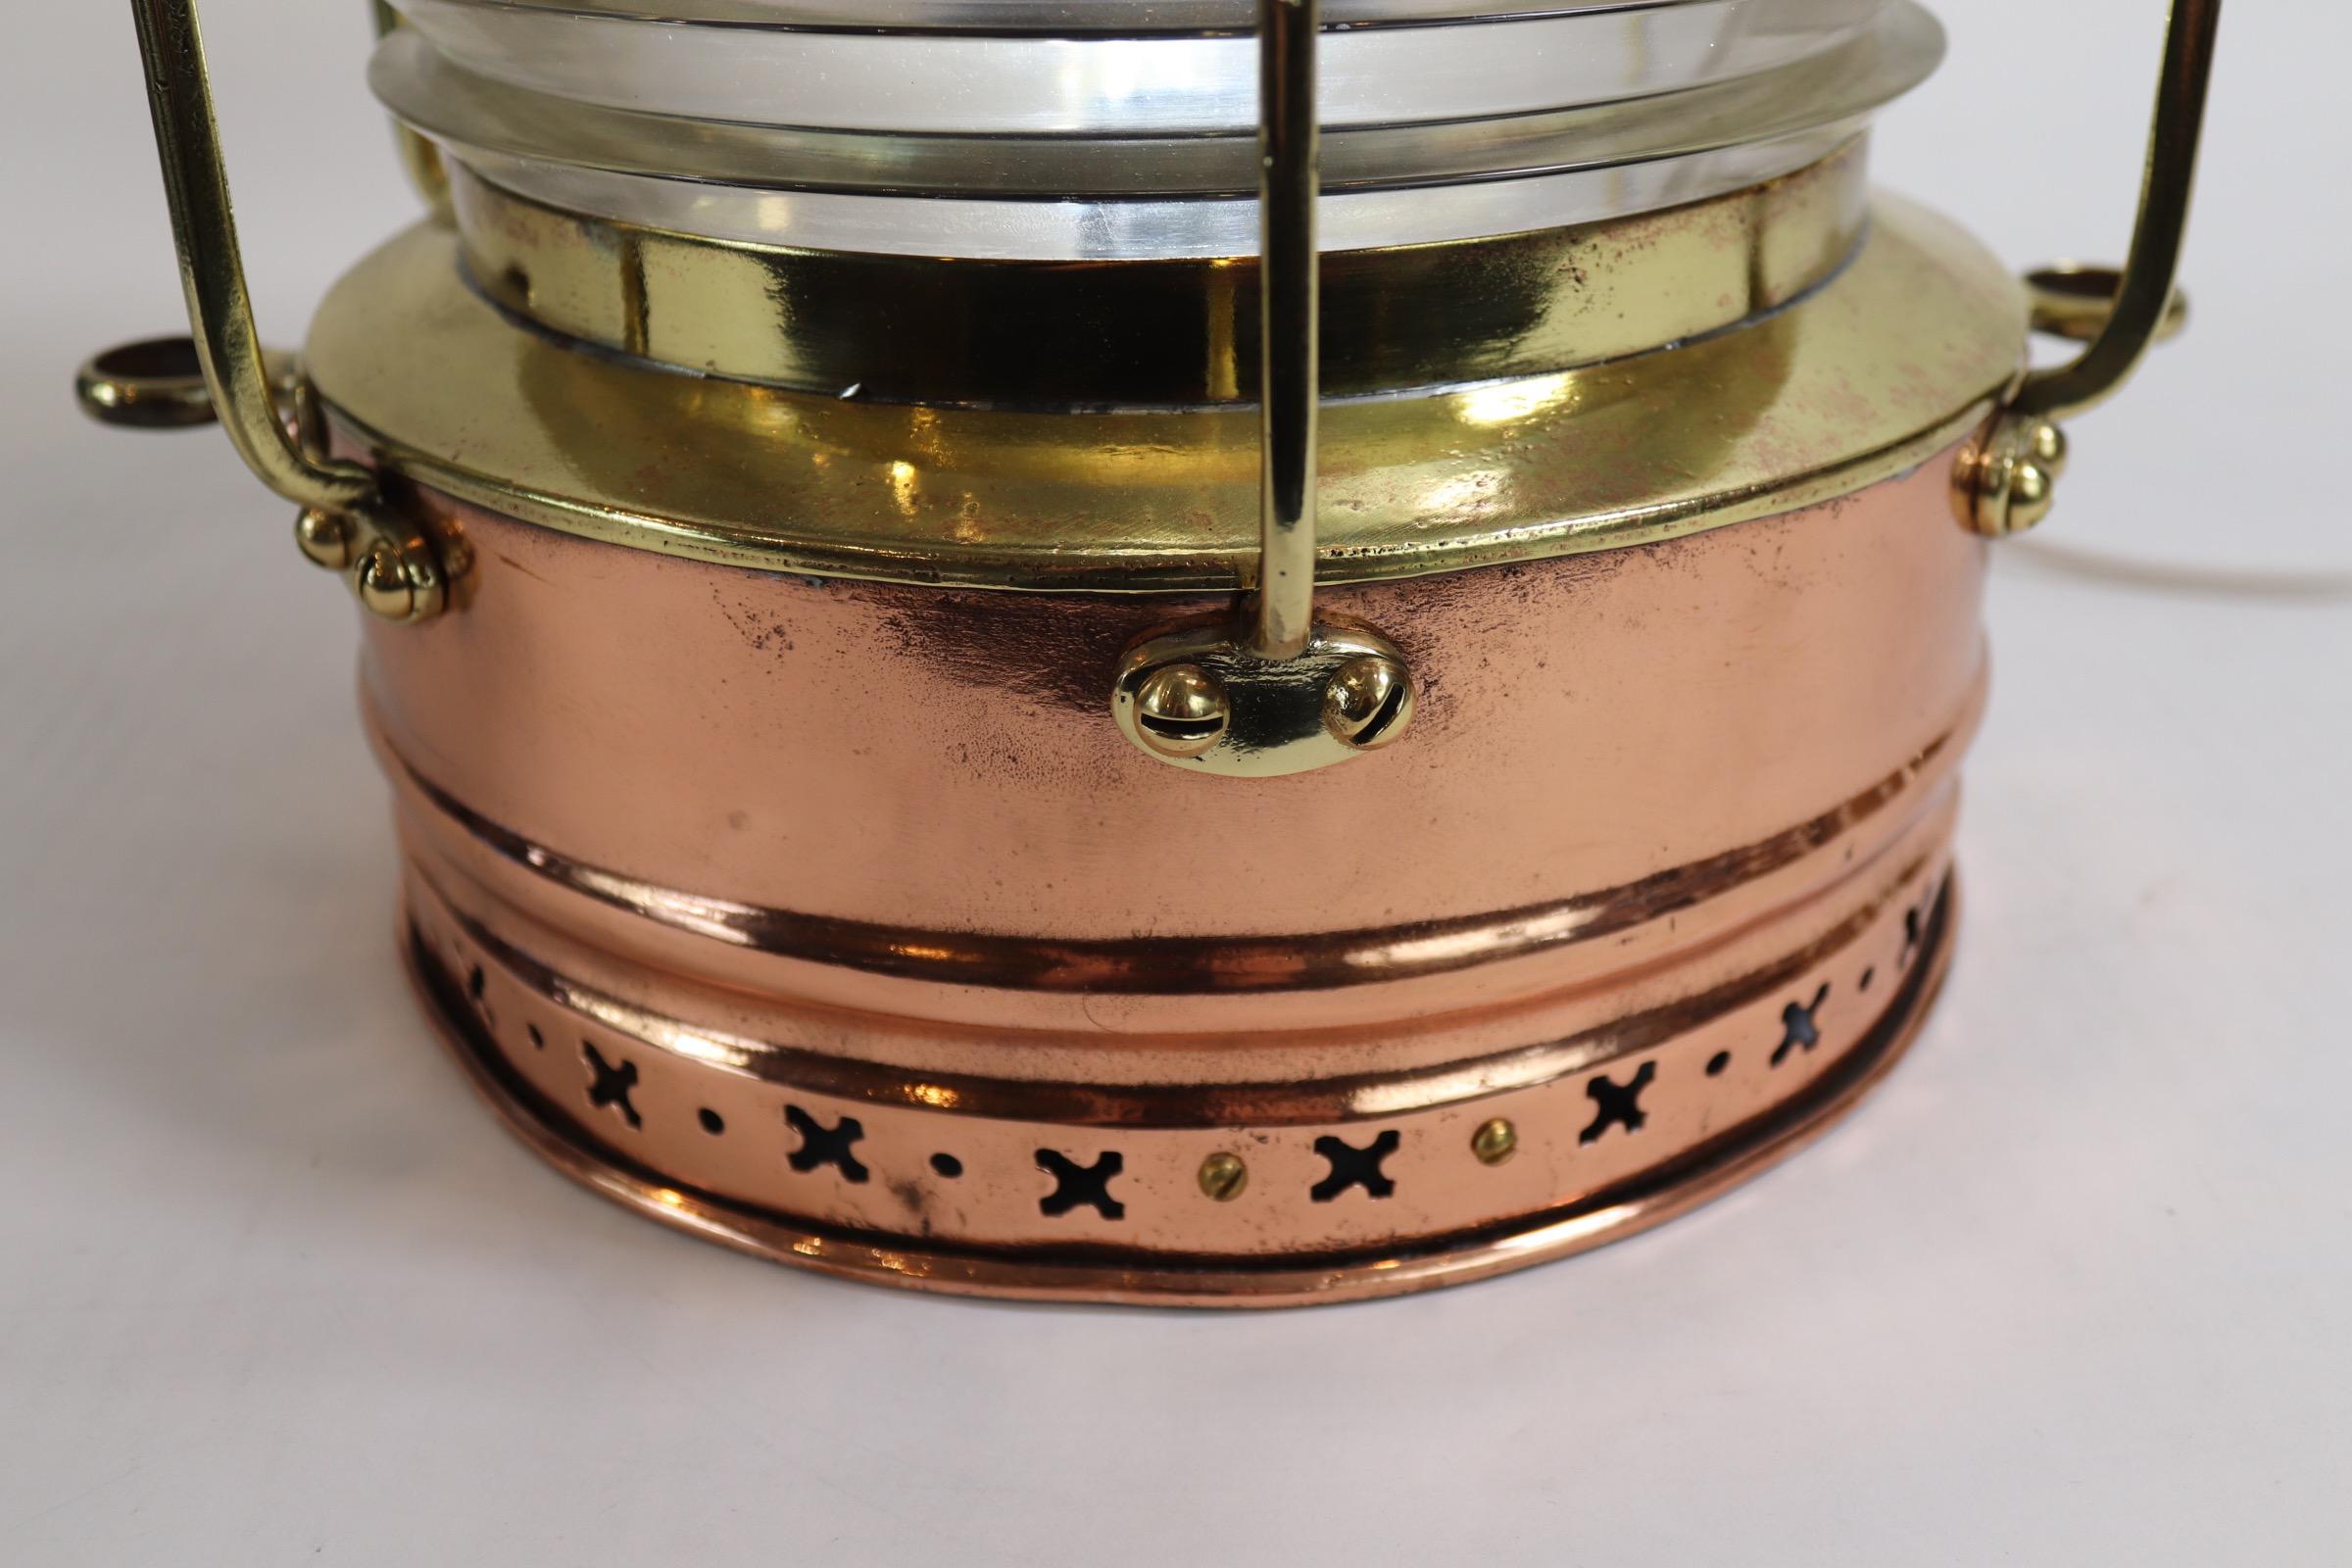 Large copper ships lantern with brass makers badge from the firm of Hugh Douglas of Liverpool. Lantern is highly polished and lacquered, fitted with a fresnel glass lens that is surrounded with protective brass bars. Wired with electric for home